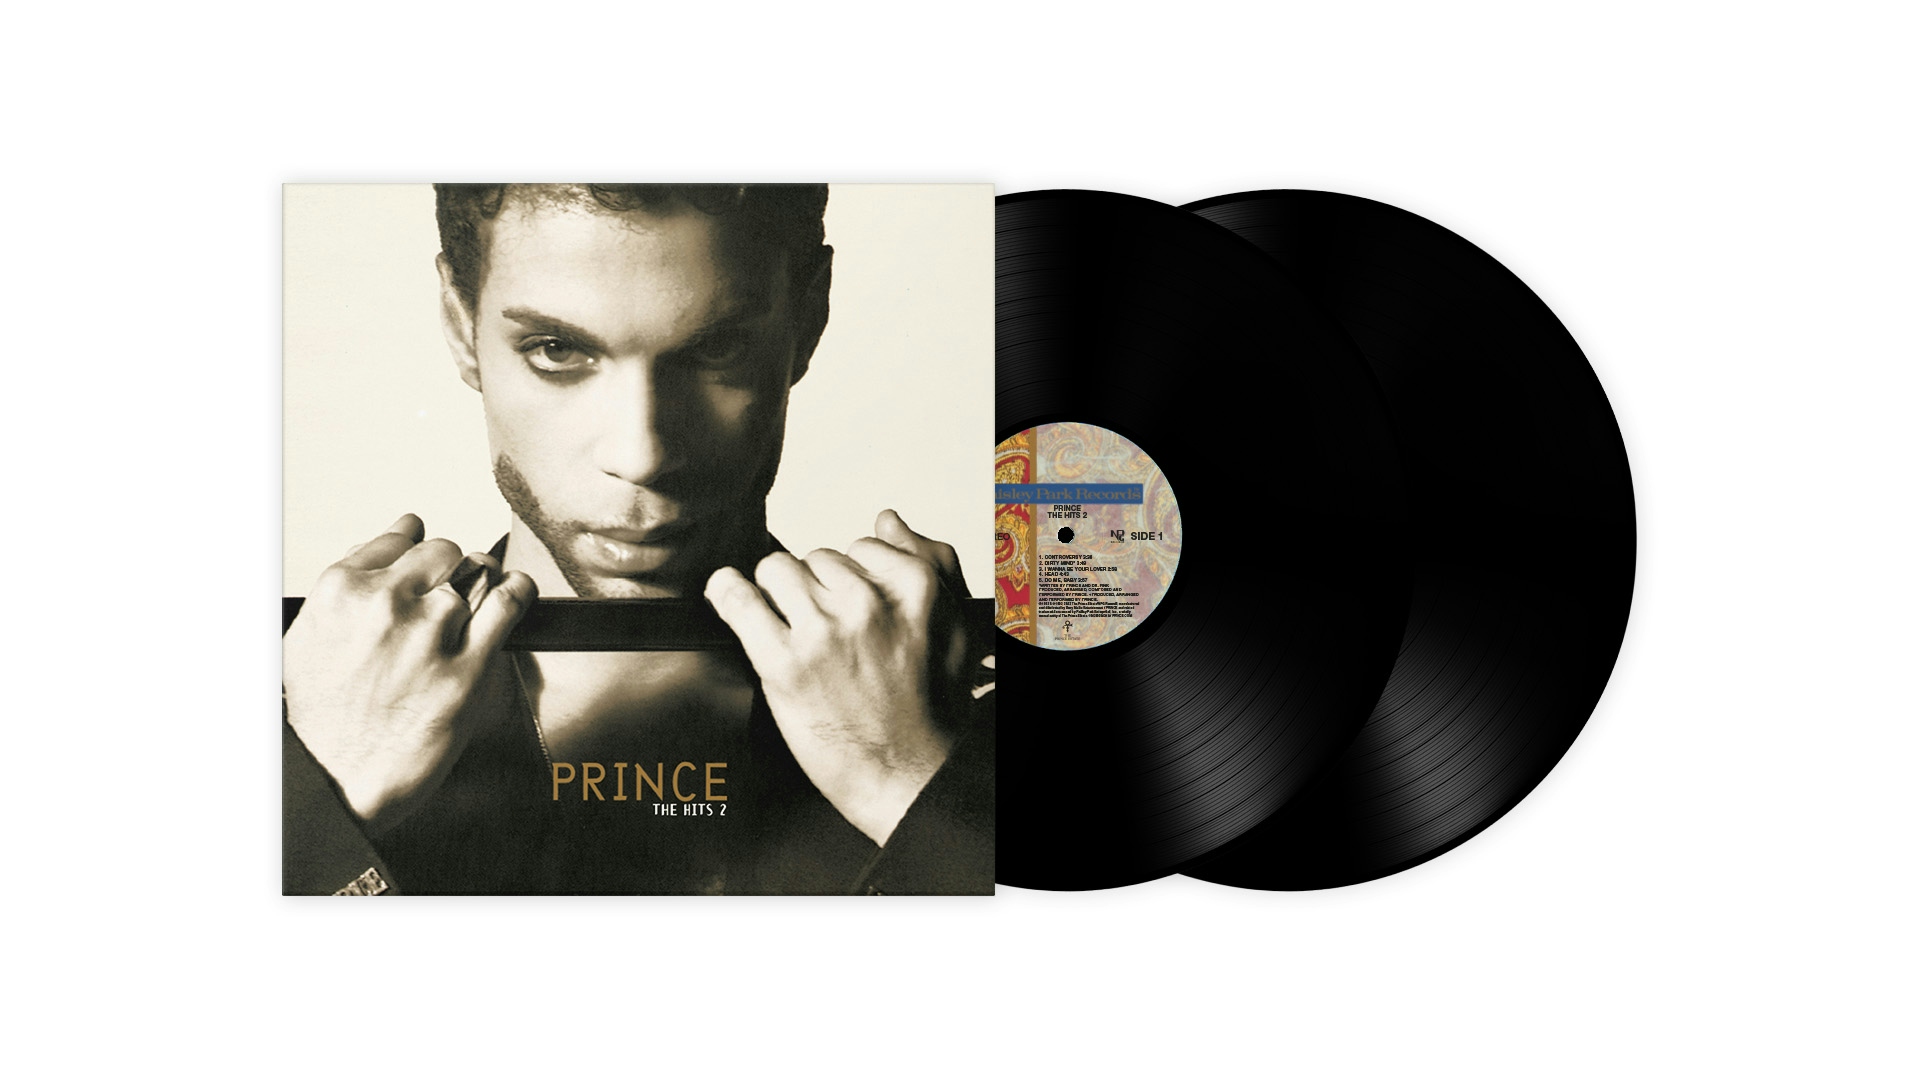 Album artwork for The Hits 2 by Prince